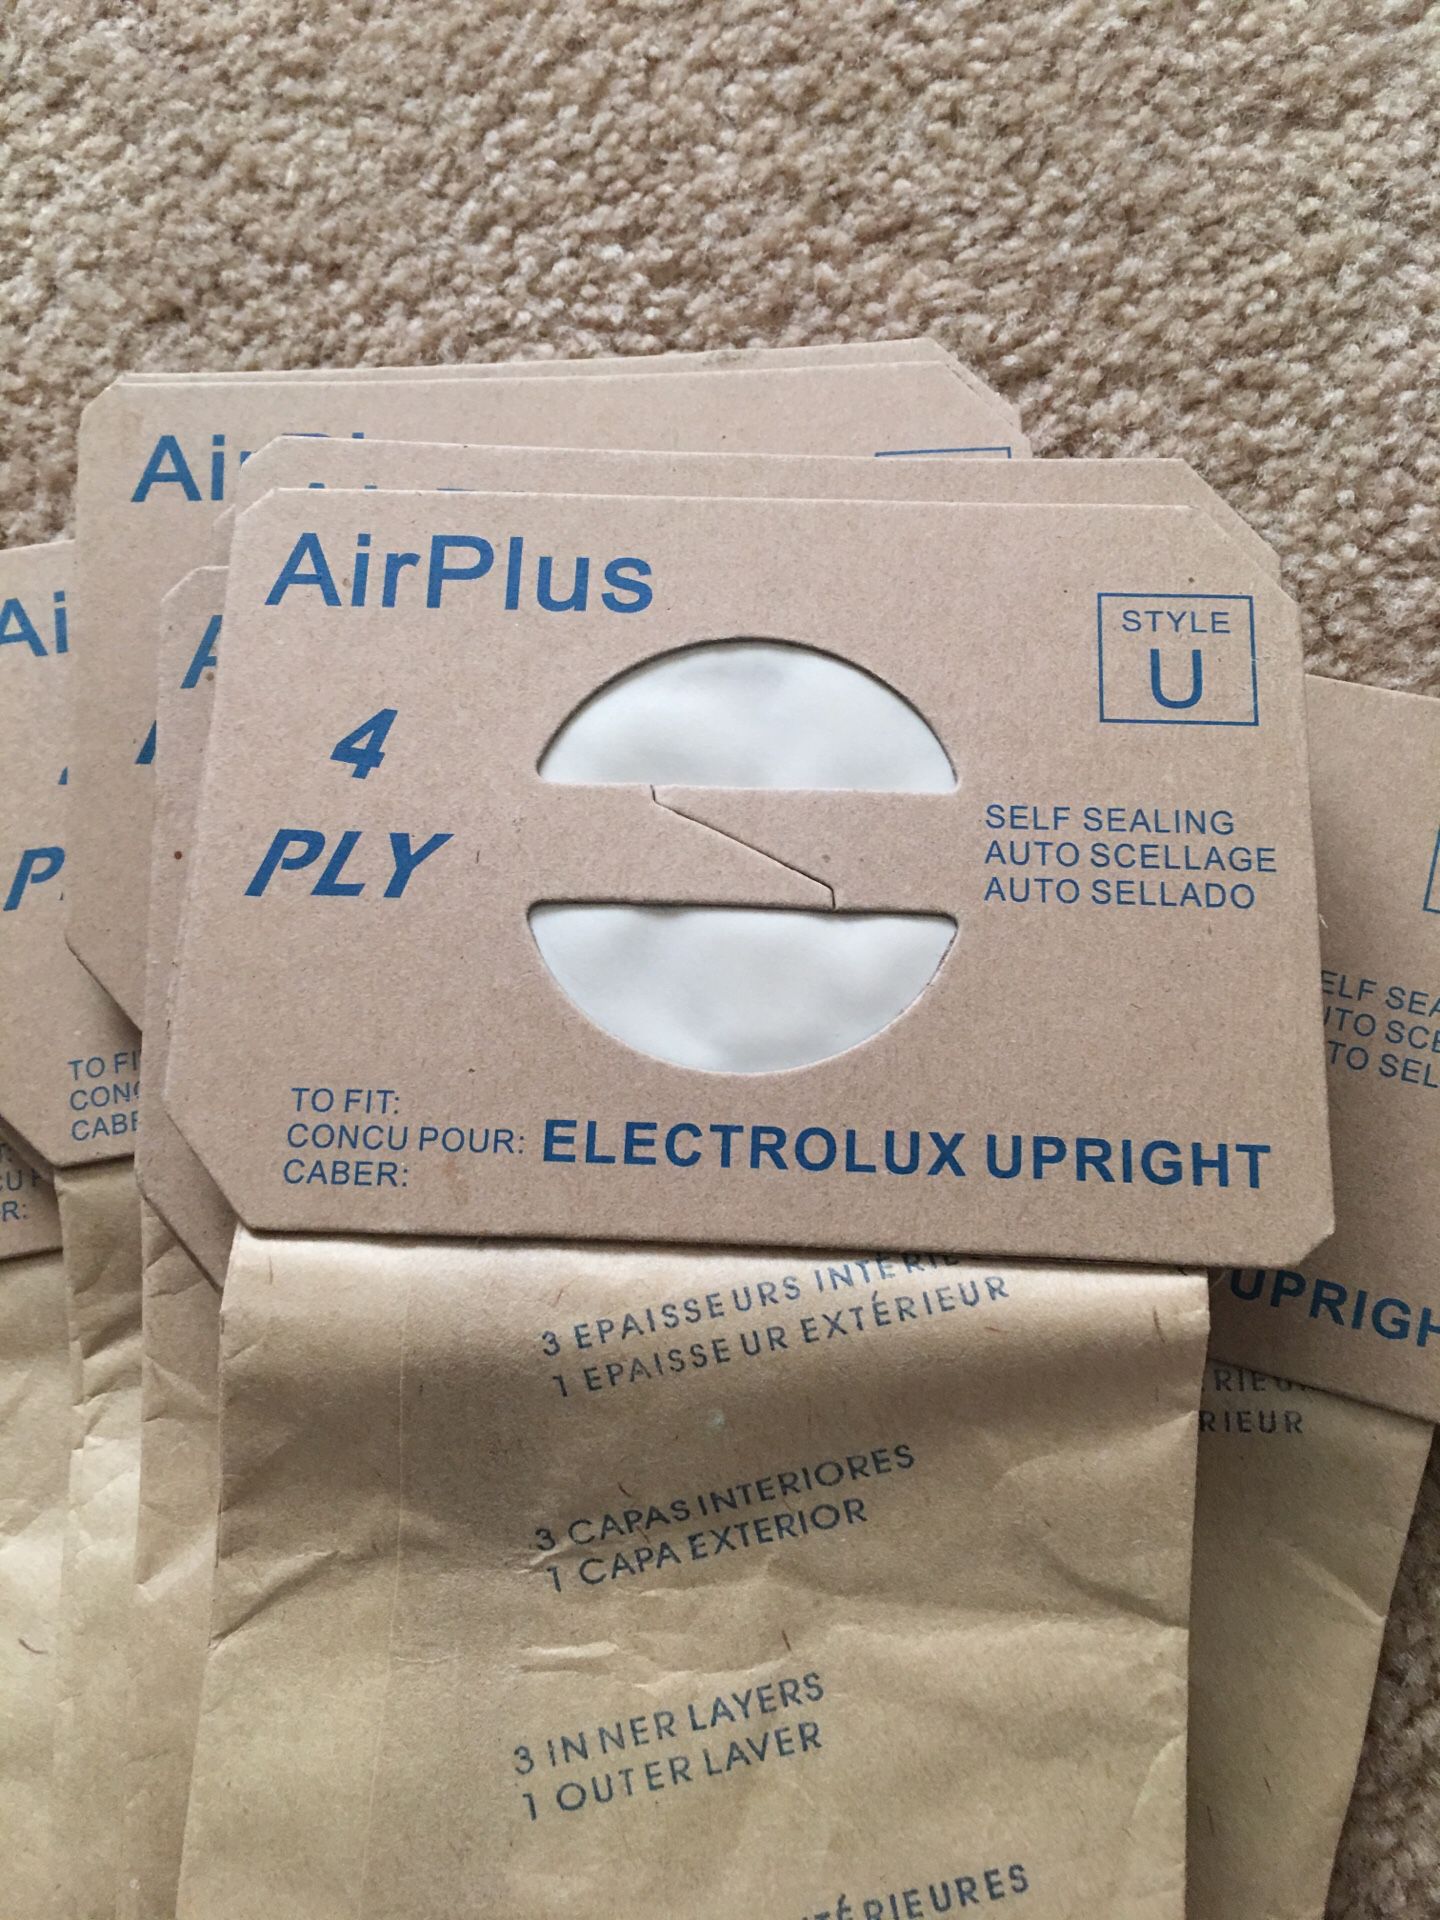 Electrolux upright vacuum bags